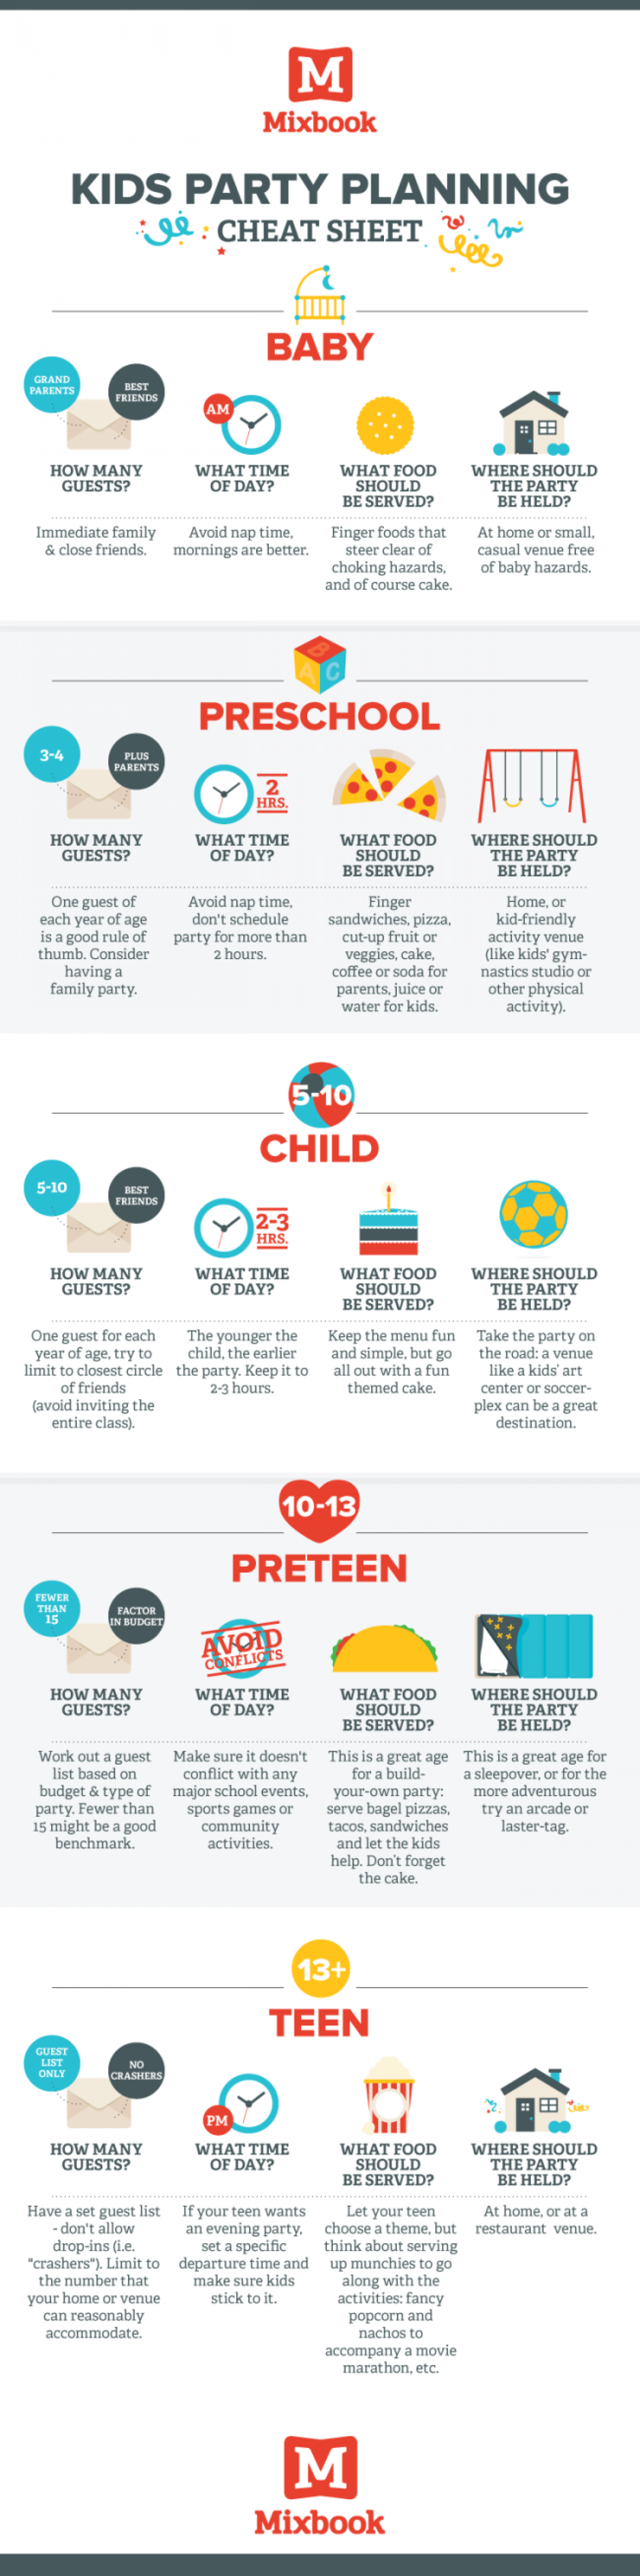 Kids Party Planning Infographic